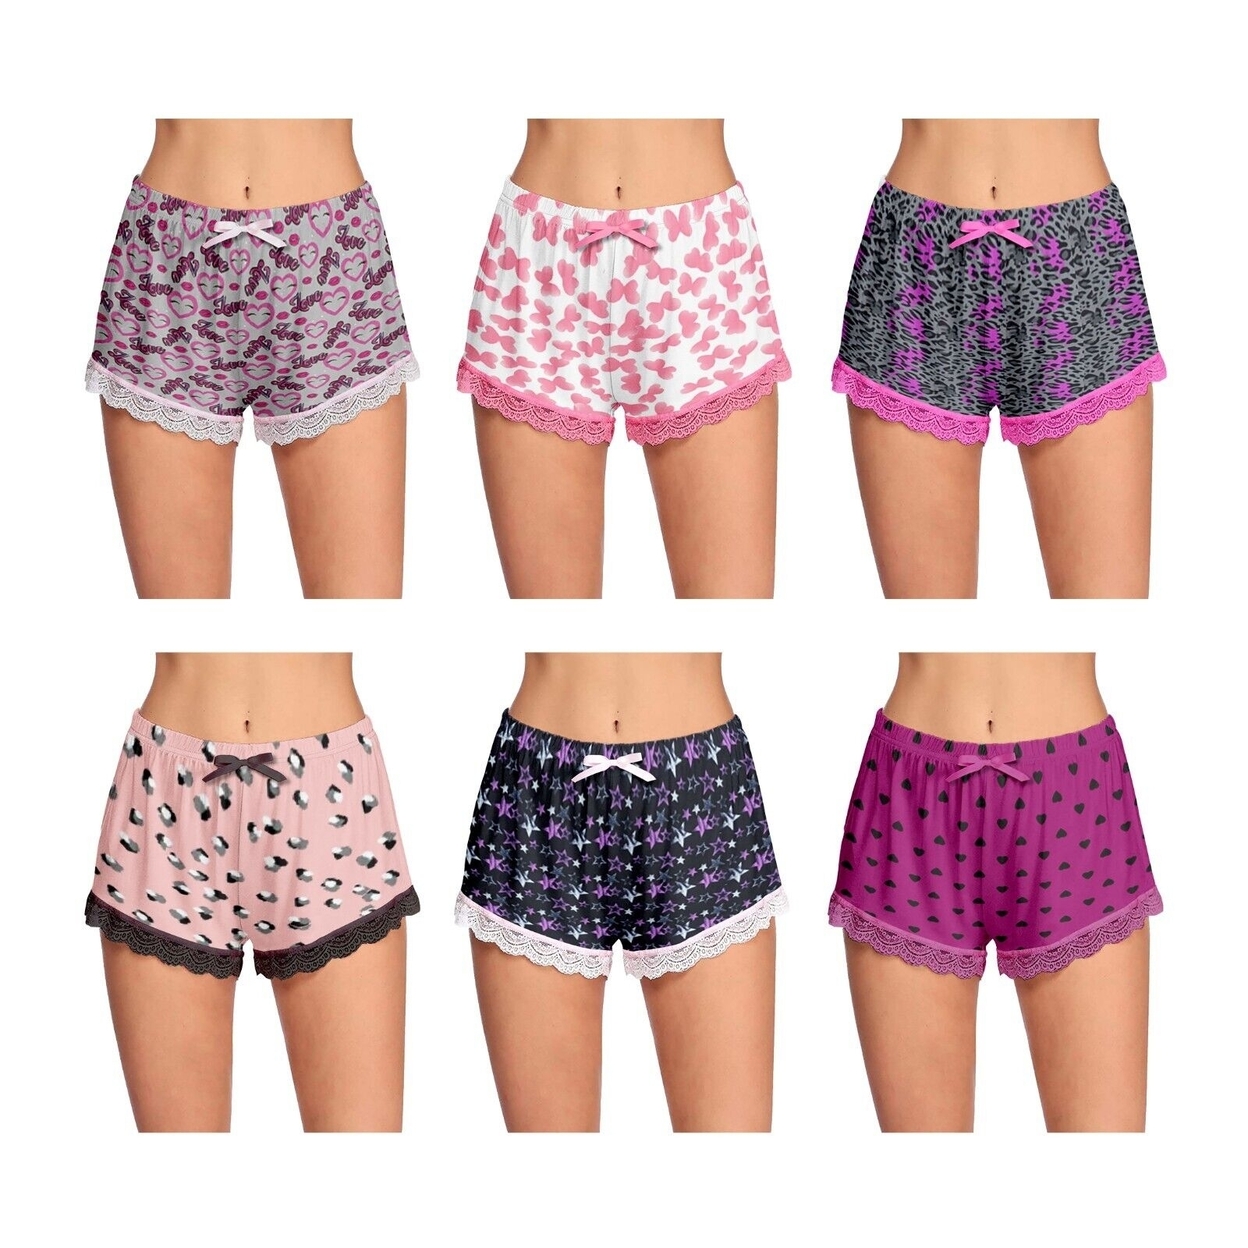 3-Pack: Women's Ultra-Soft Cozy Fun Printed Lace Trim Pajama Lounge Shorts - Large, Shapes